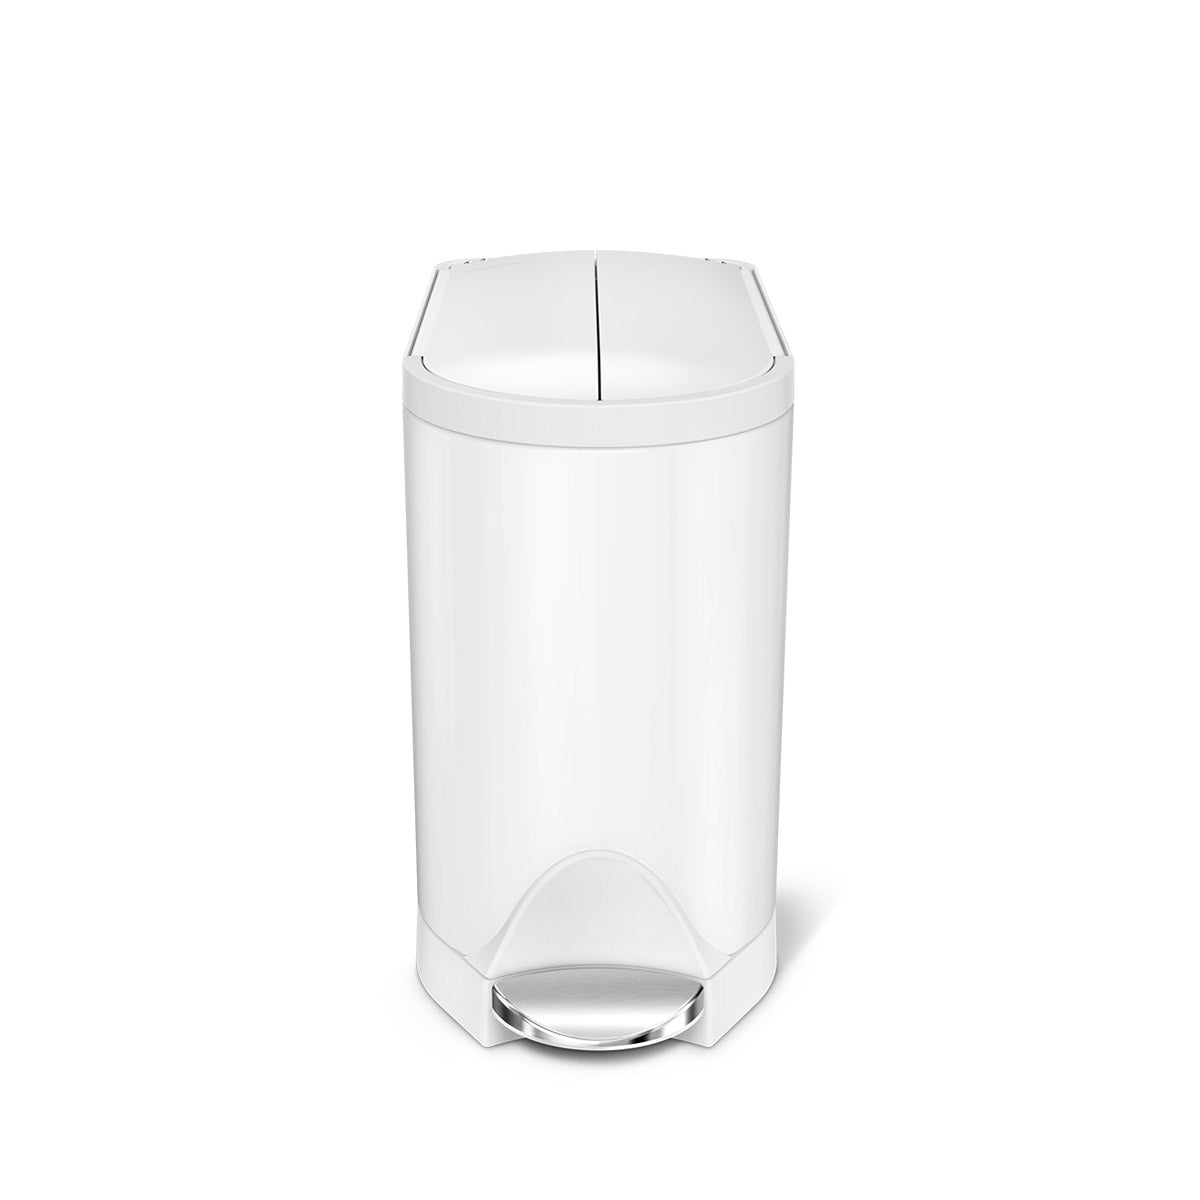 simplehuman 10L Butterfly Steel Step Trash Can White